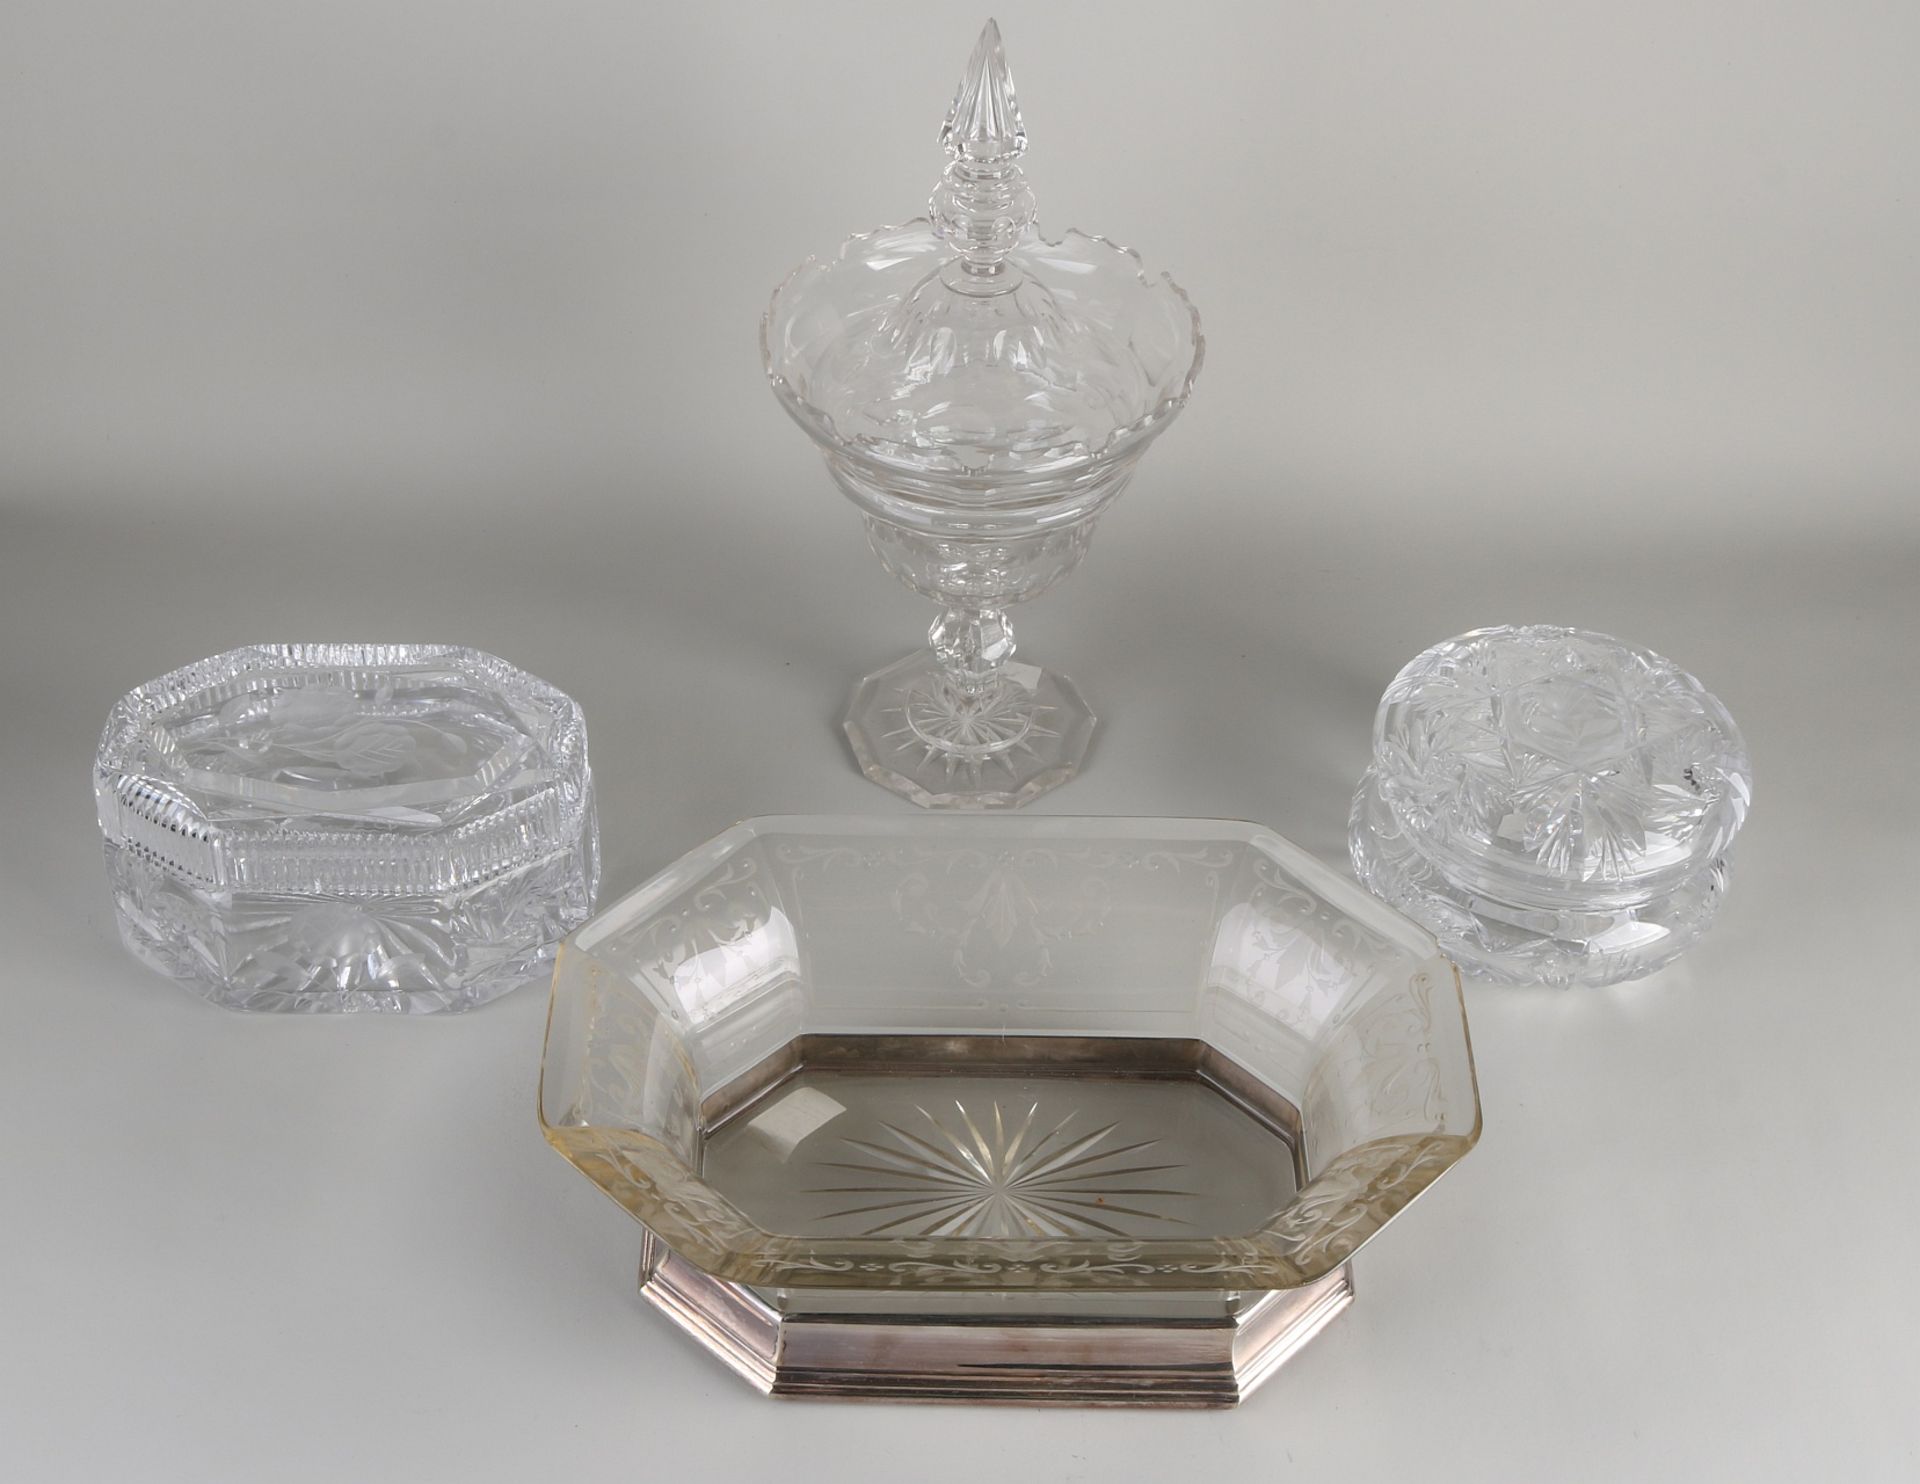 4x Old/antique crystal glass